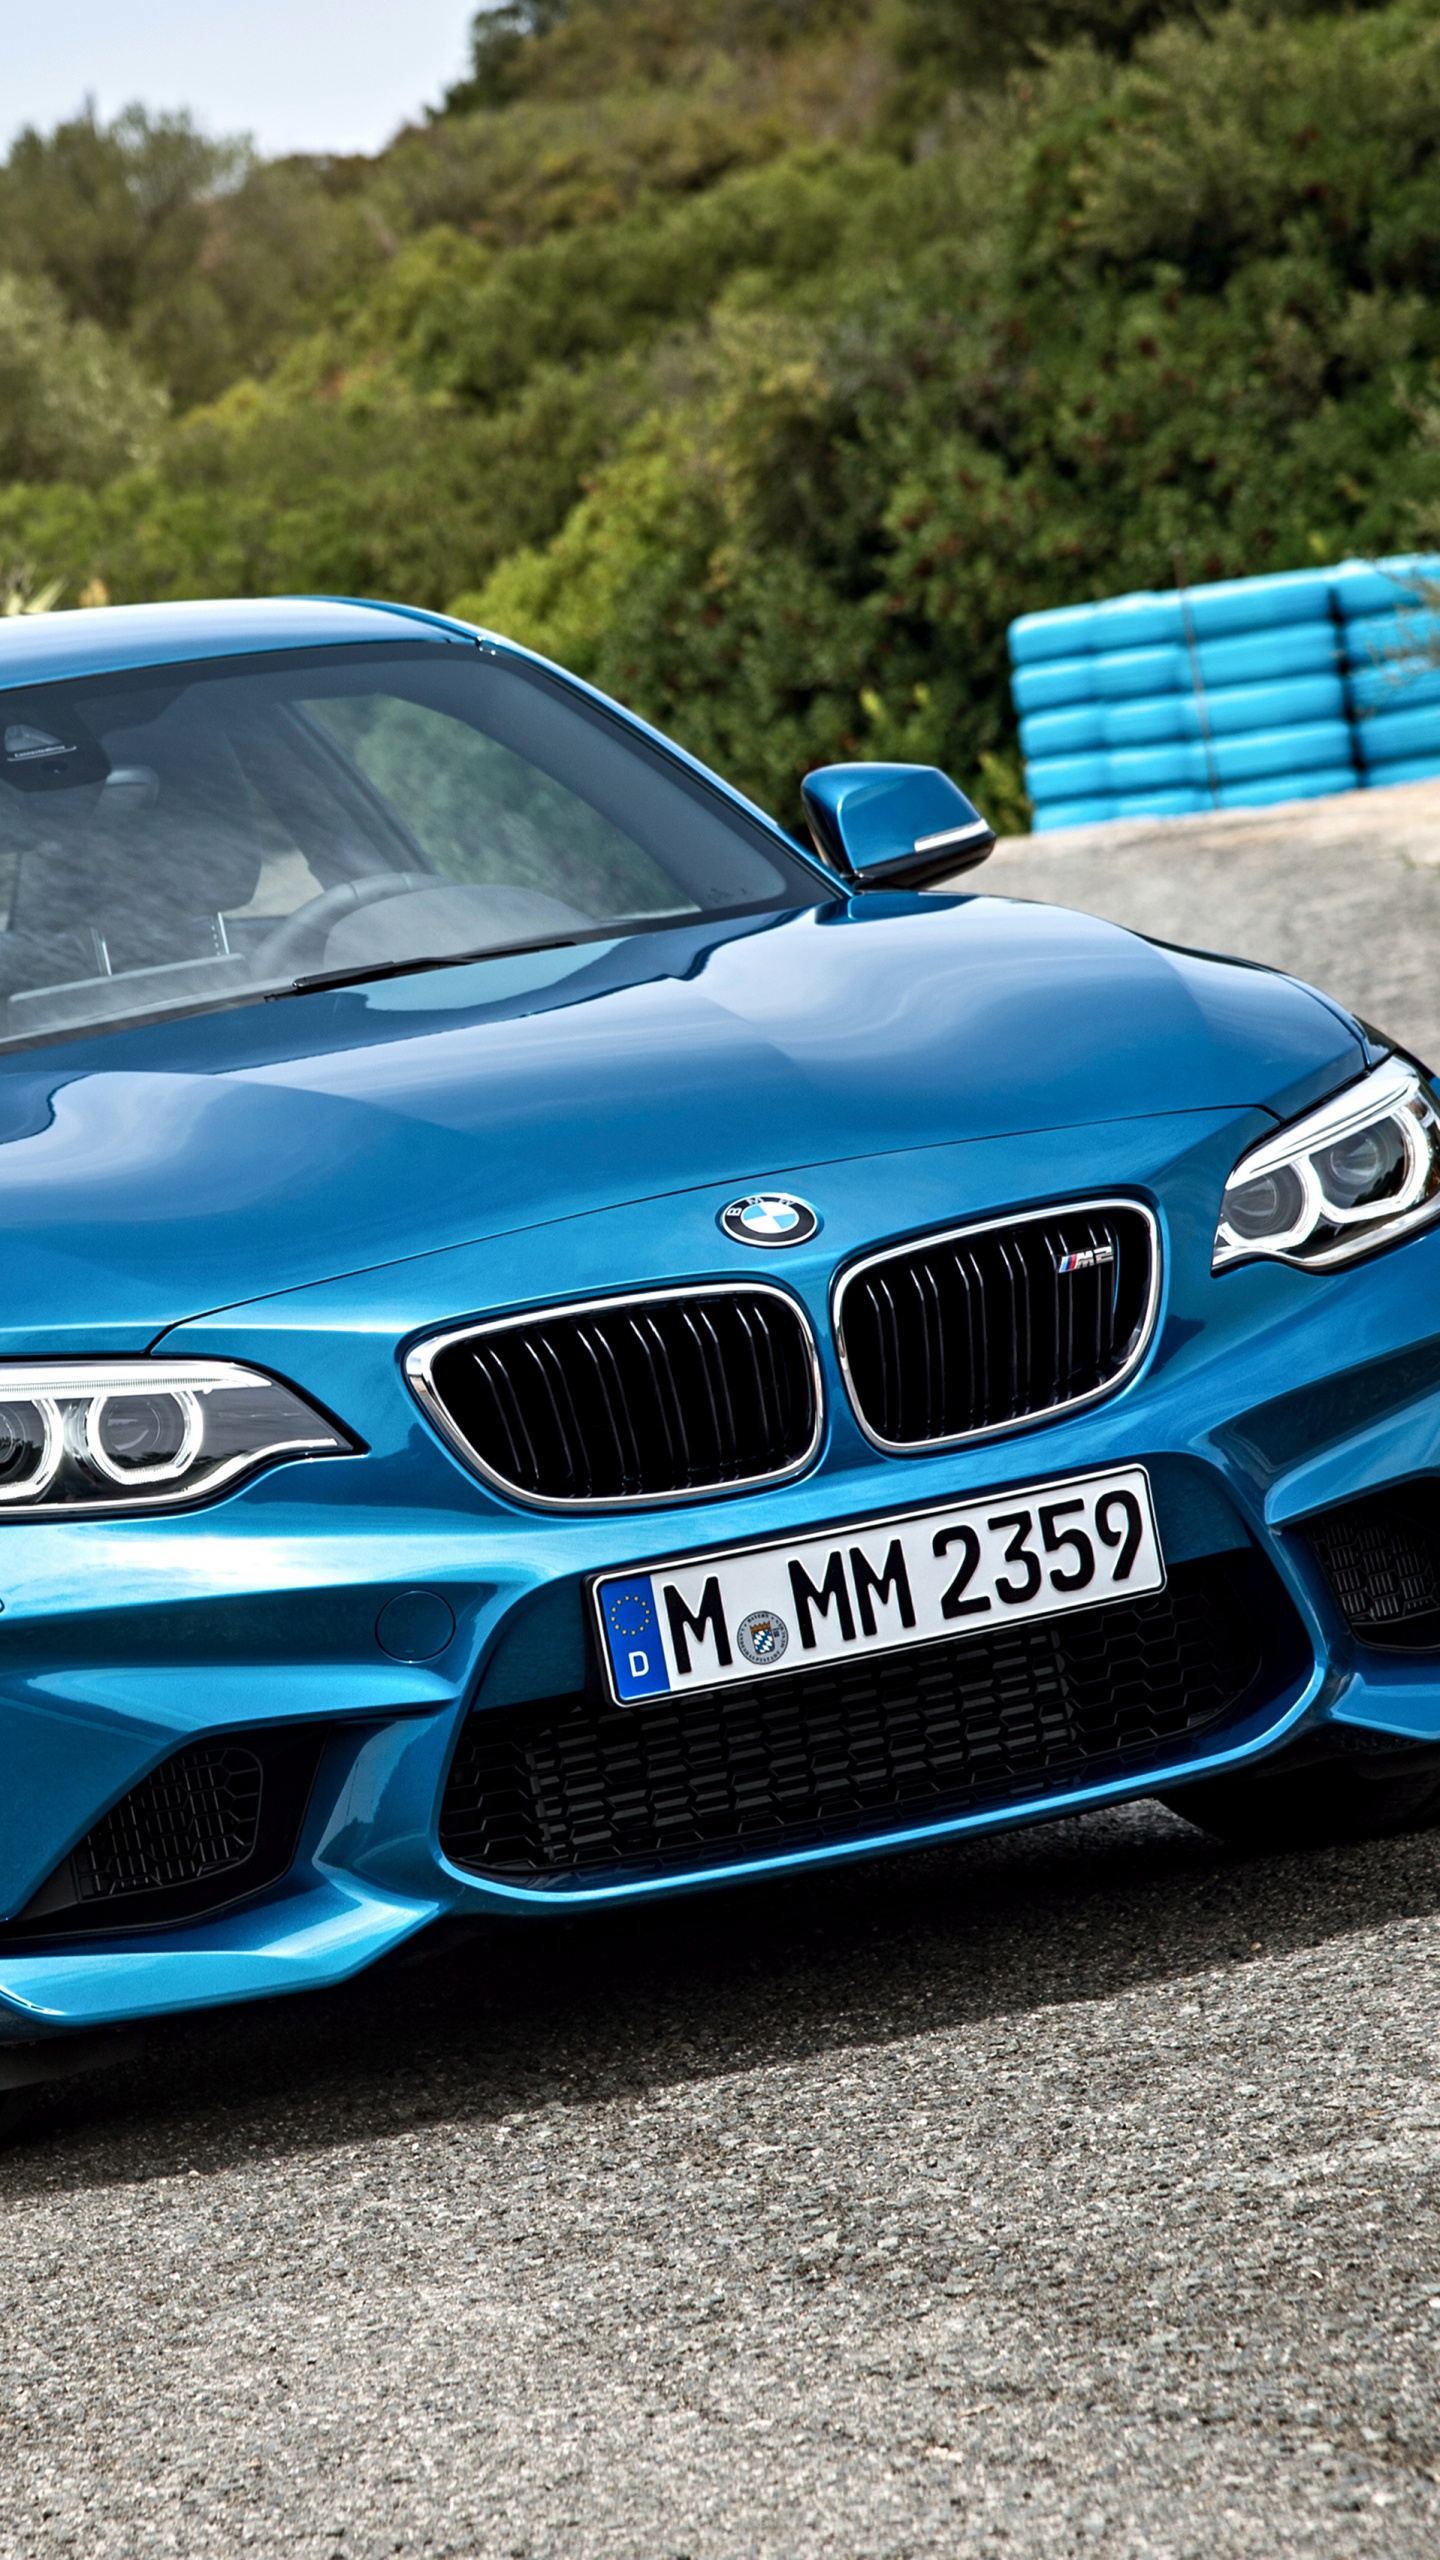 Blue Bmw m 3 on Road During Daytime. Wallpaper in 1440x2560 Resolution